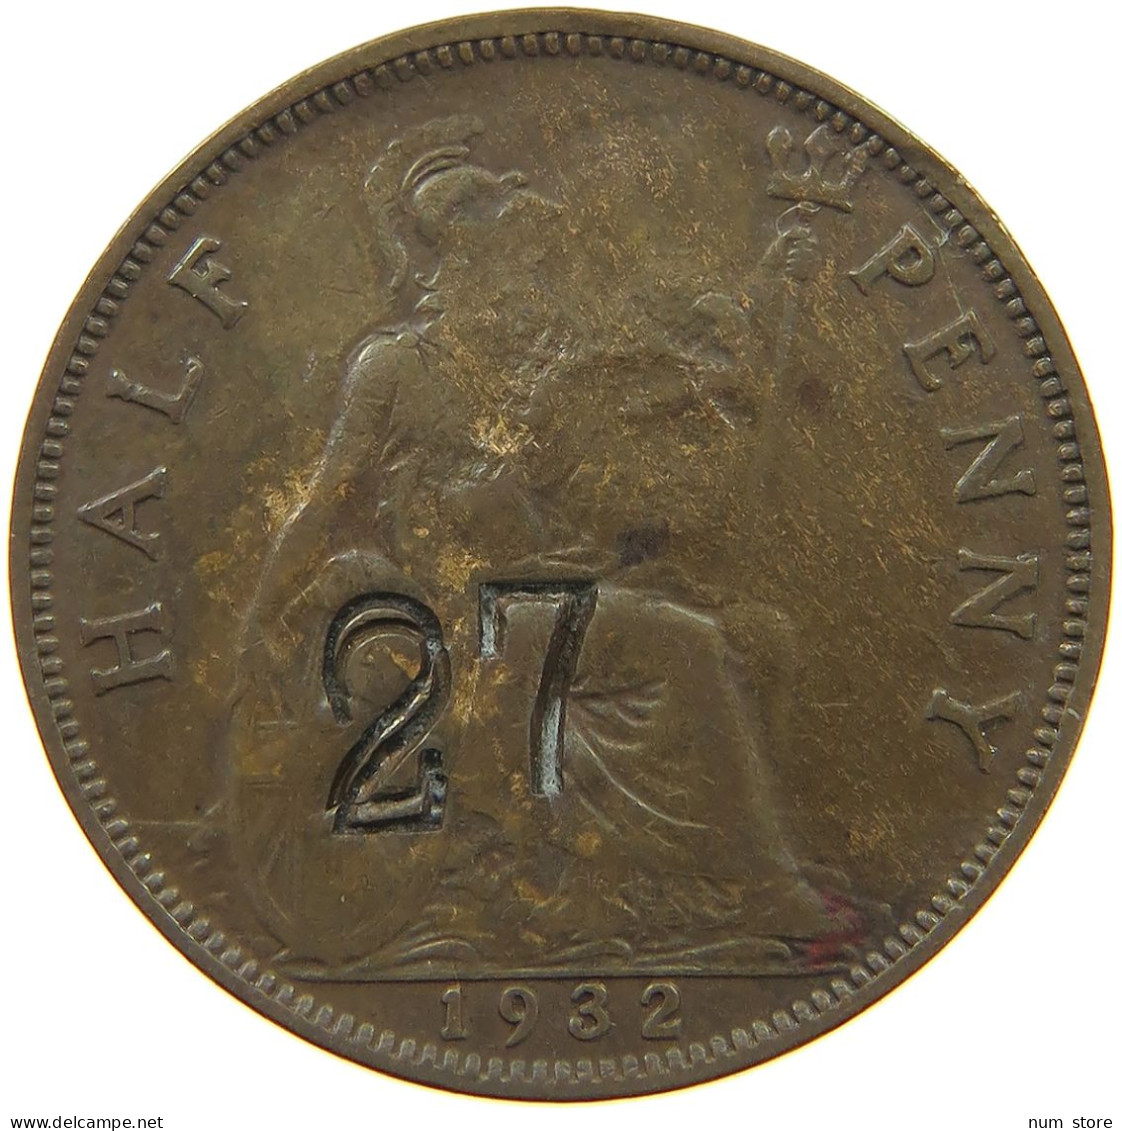 GREAT BRITAIN HALFPENNY 1932 George V. (1910-1936) COUNTERMARKED 27 BOTH SIDES #a042 0247 - C. 1/2 Penny